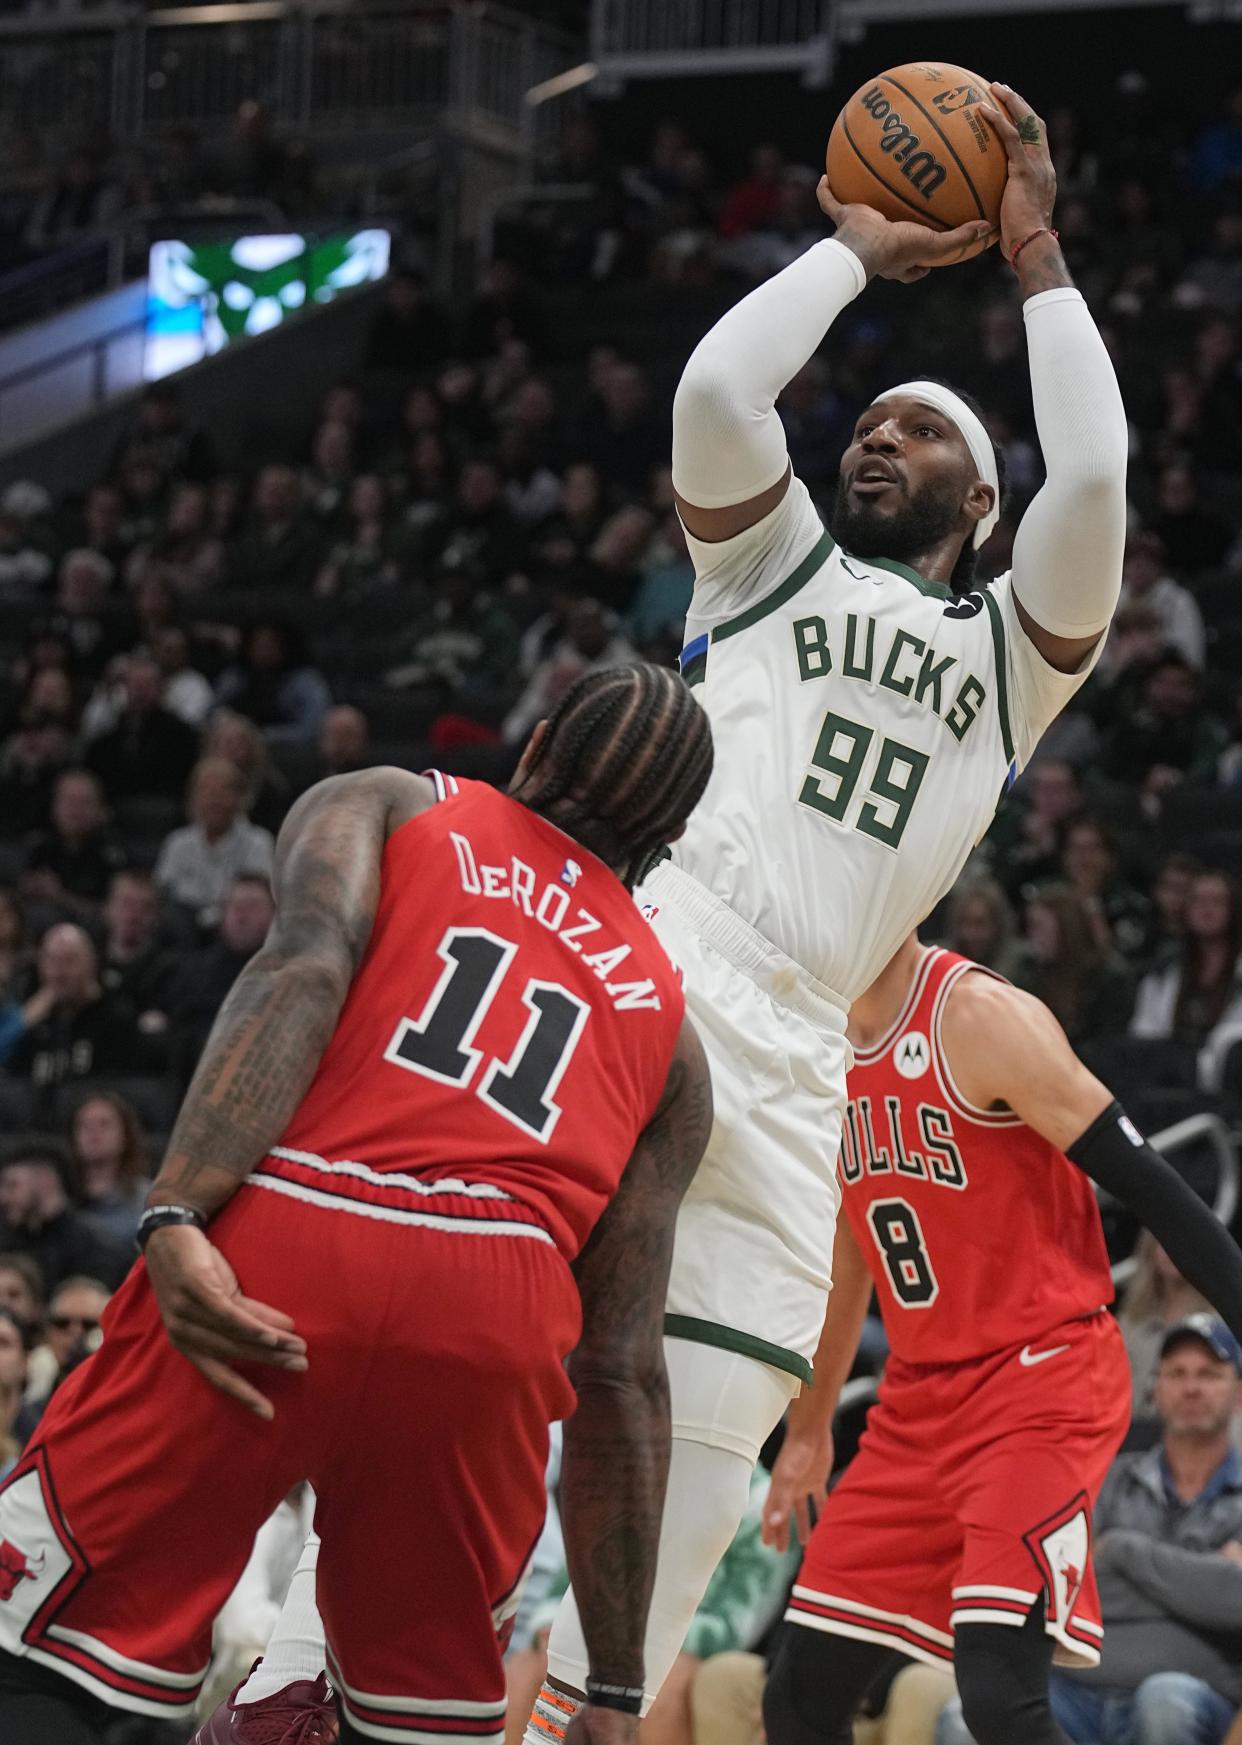 Milwaukee Bucks forward Jae Crowder will return to the lineup tonight after being out for over two months with an injury.